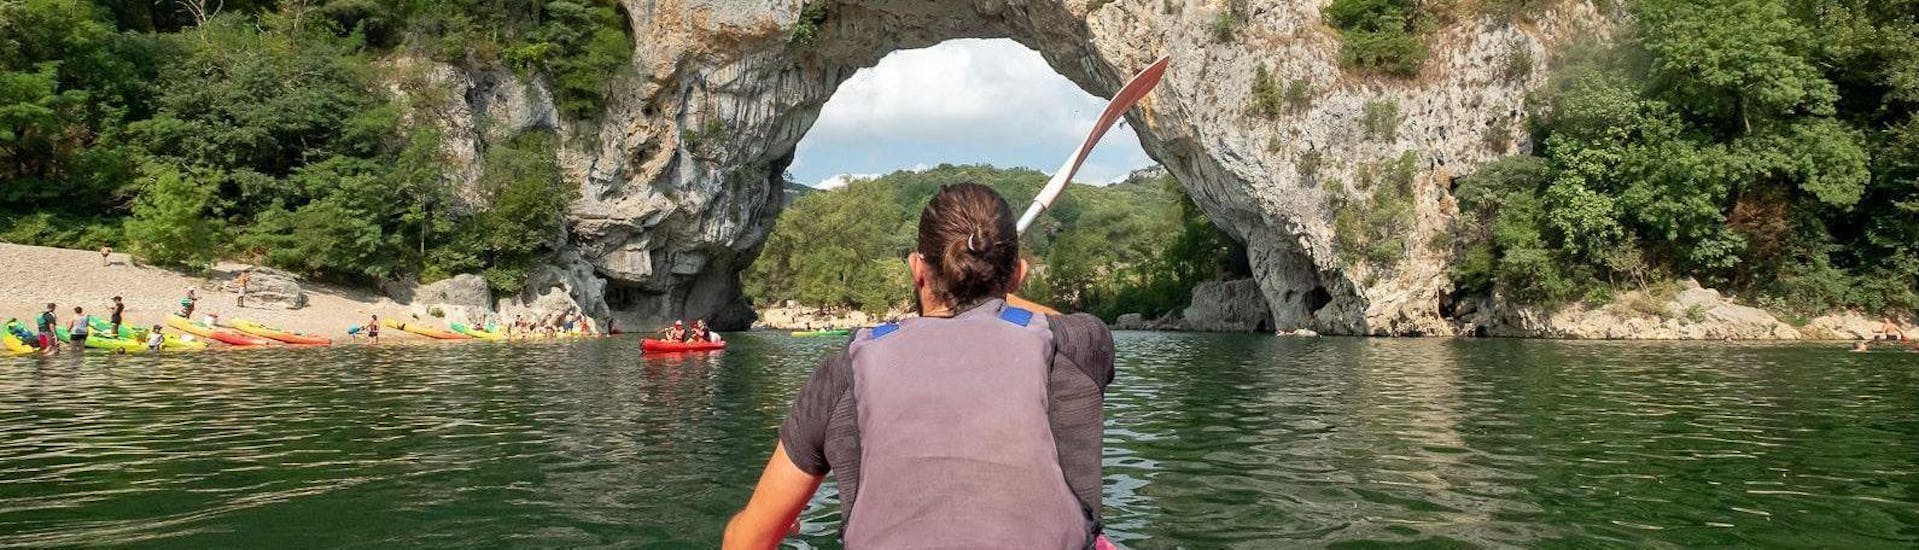 On the tour "Maxi-Discovery 13km" in Ardèche, a couple is passing under the famous Pont d'Arc arch whilst sitting in a high-quality canoe rented at Aigue Vive.